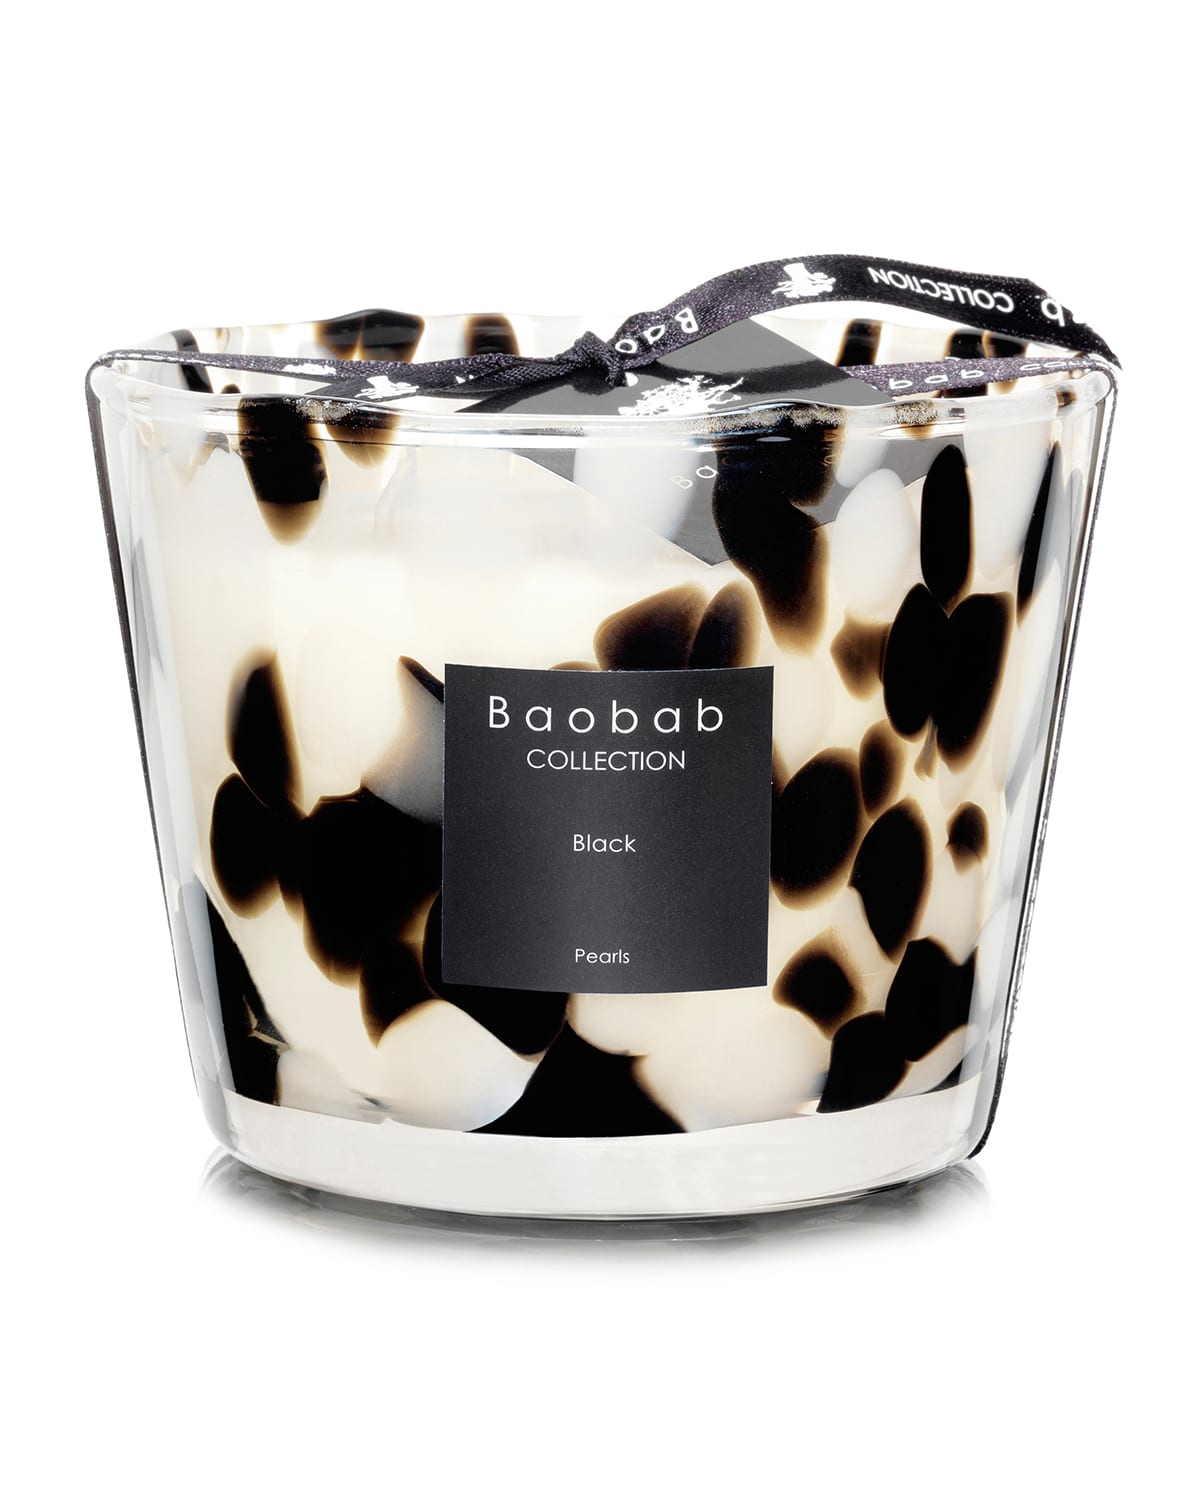 Baobab Collection Black Pearls Scented Candle, 3.9" In Black/white